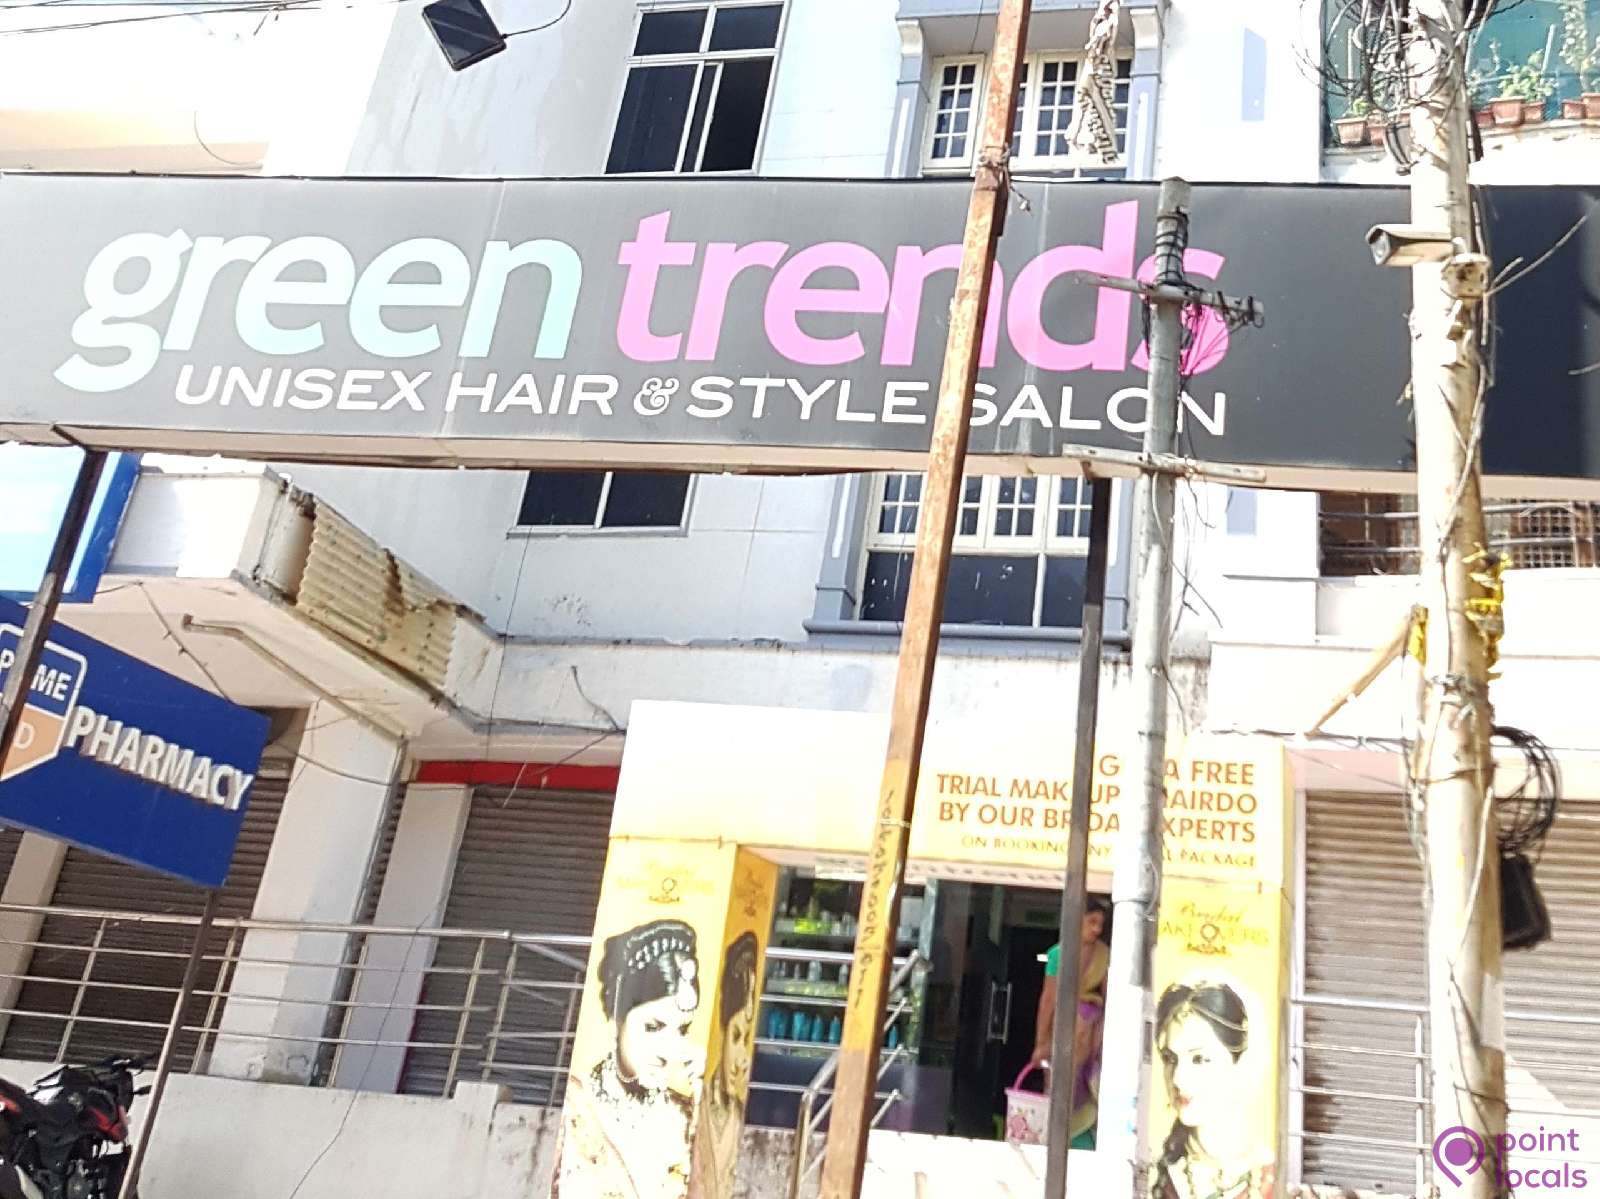 Green Trends Unsex Hair and Style Salon - Green Trends Salon in  Hyderabad,Telangana | Pointlocals